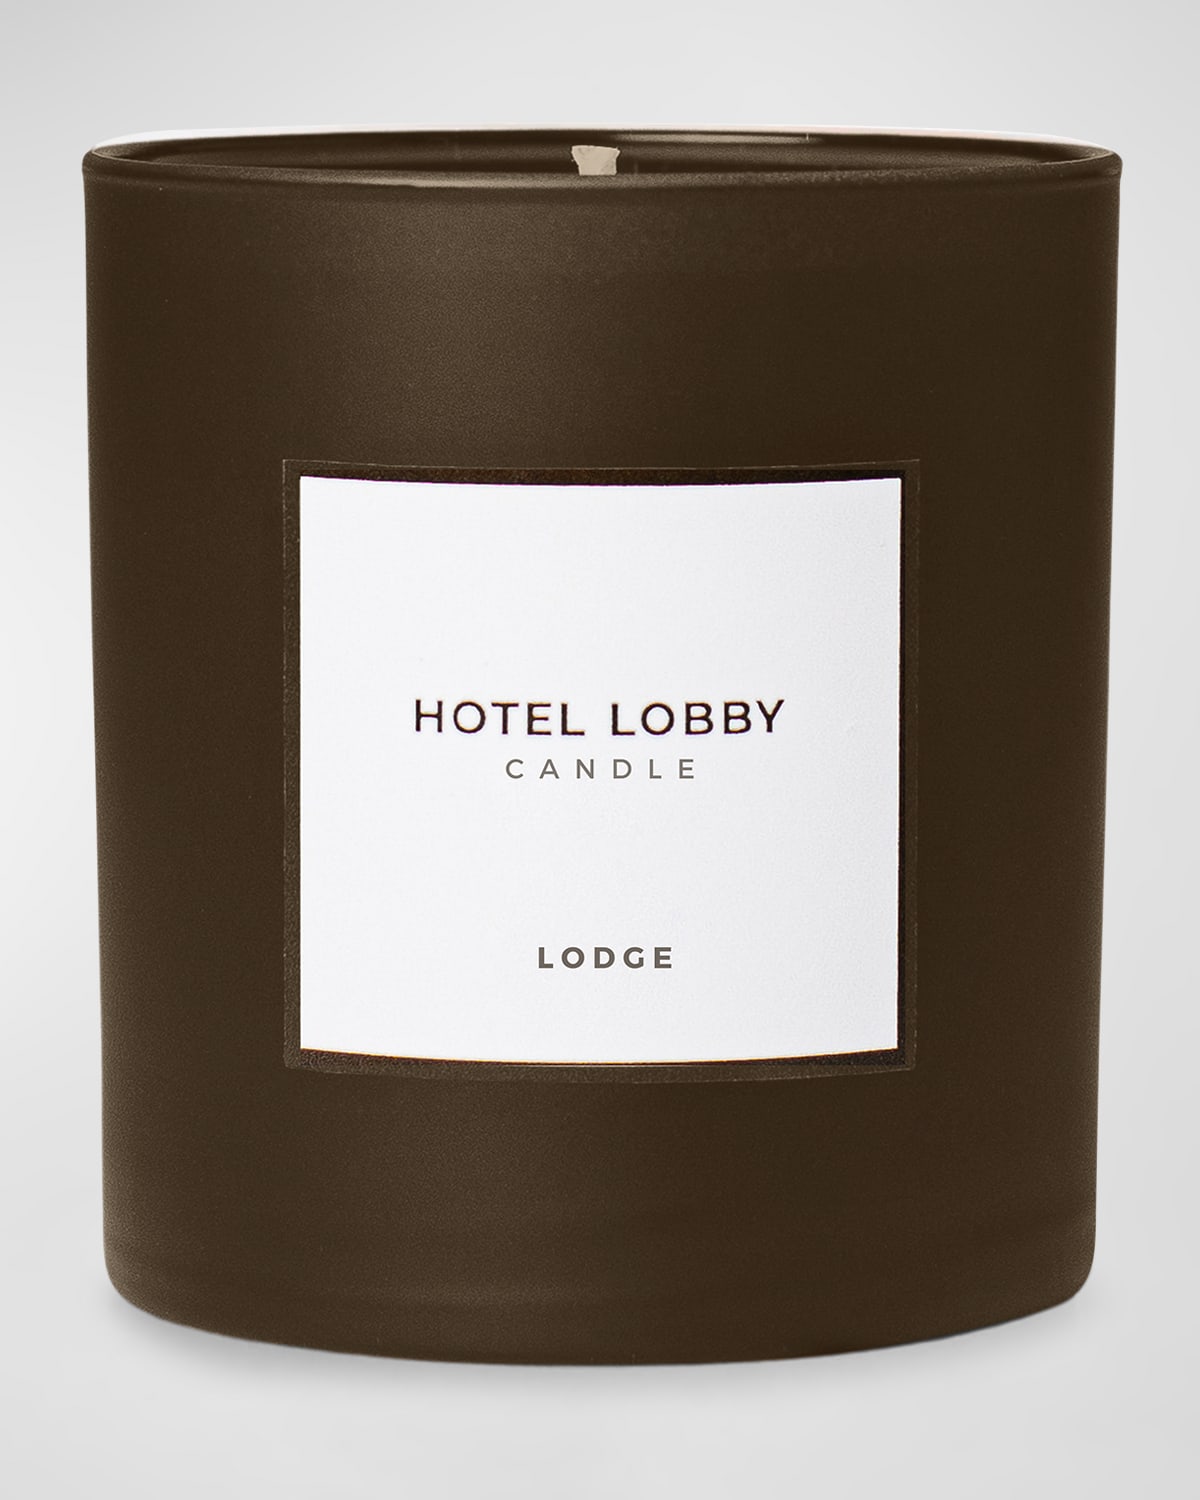 Hotel Lobby Candle 9.75 Oz. Lodge Candle In Brown